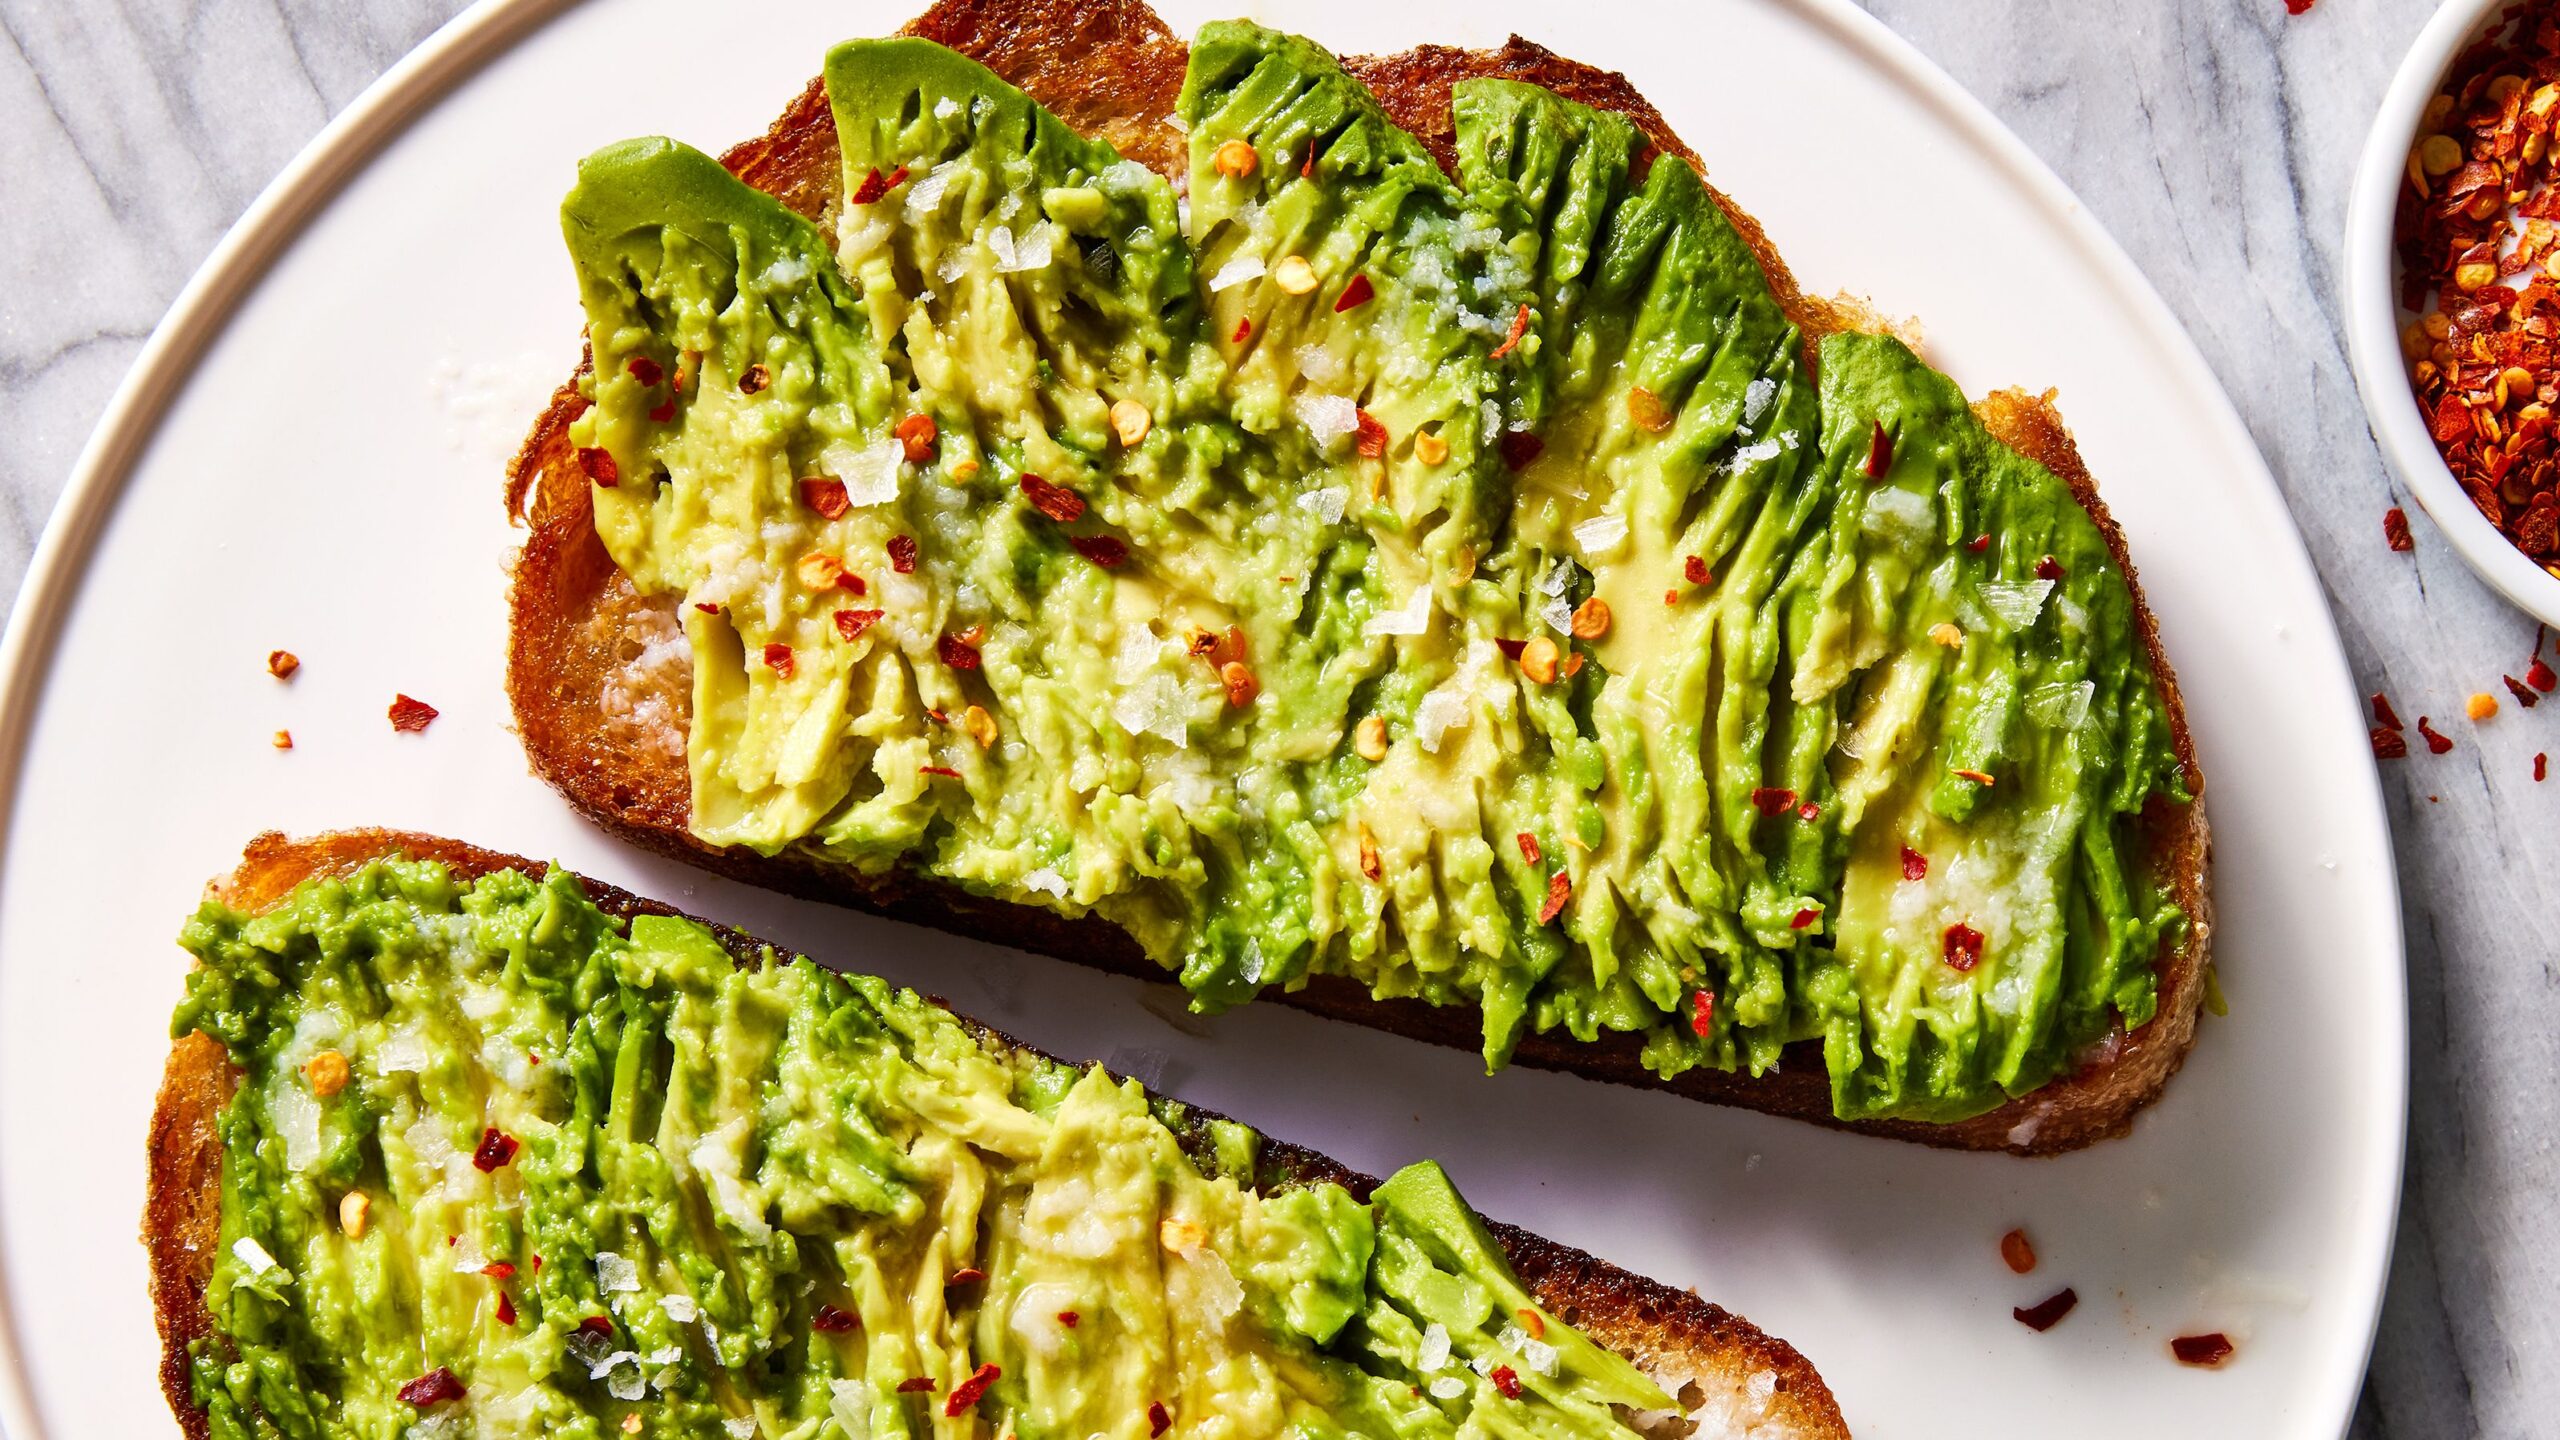 Easy Lunch, Avocado Toast, Vegetarian, Light Lunch, 10-Minute Meals, Bread Recipes, Healthy Recipes, Quick Recipes, Plant-Based, Brunch,